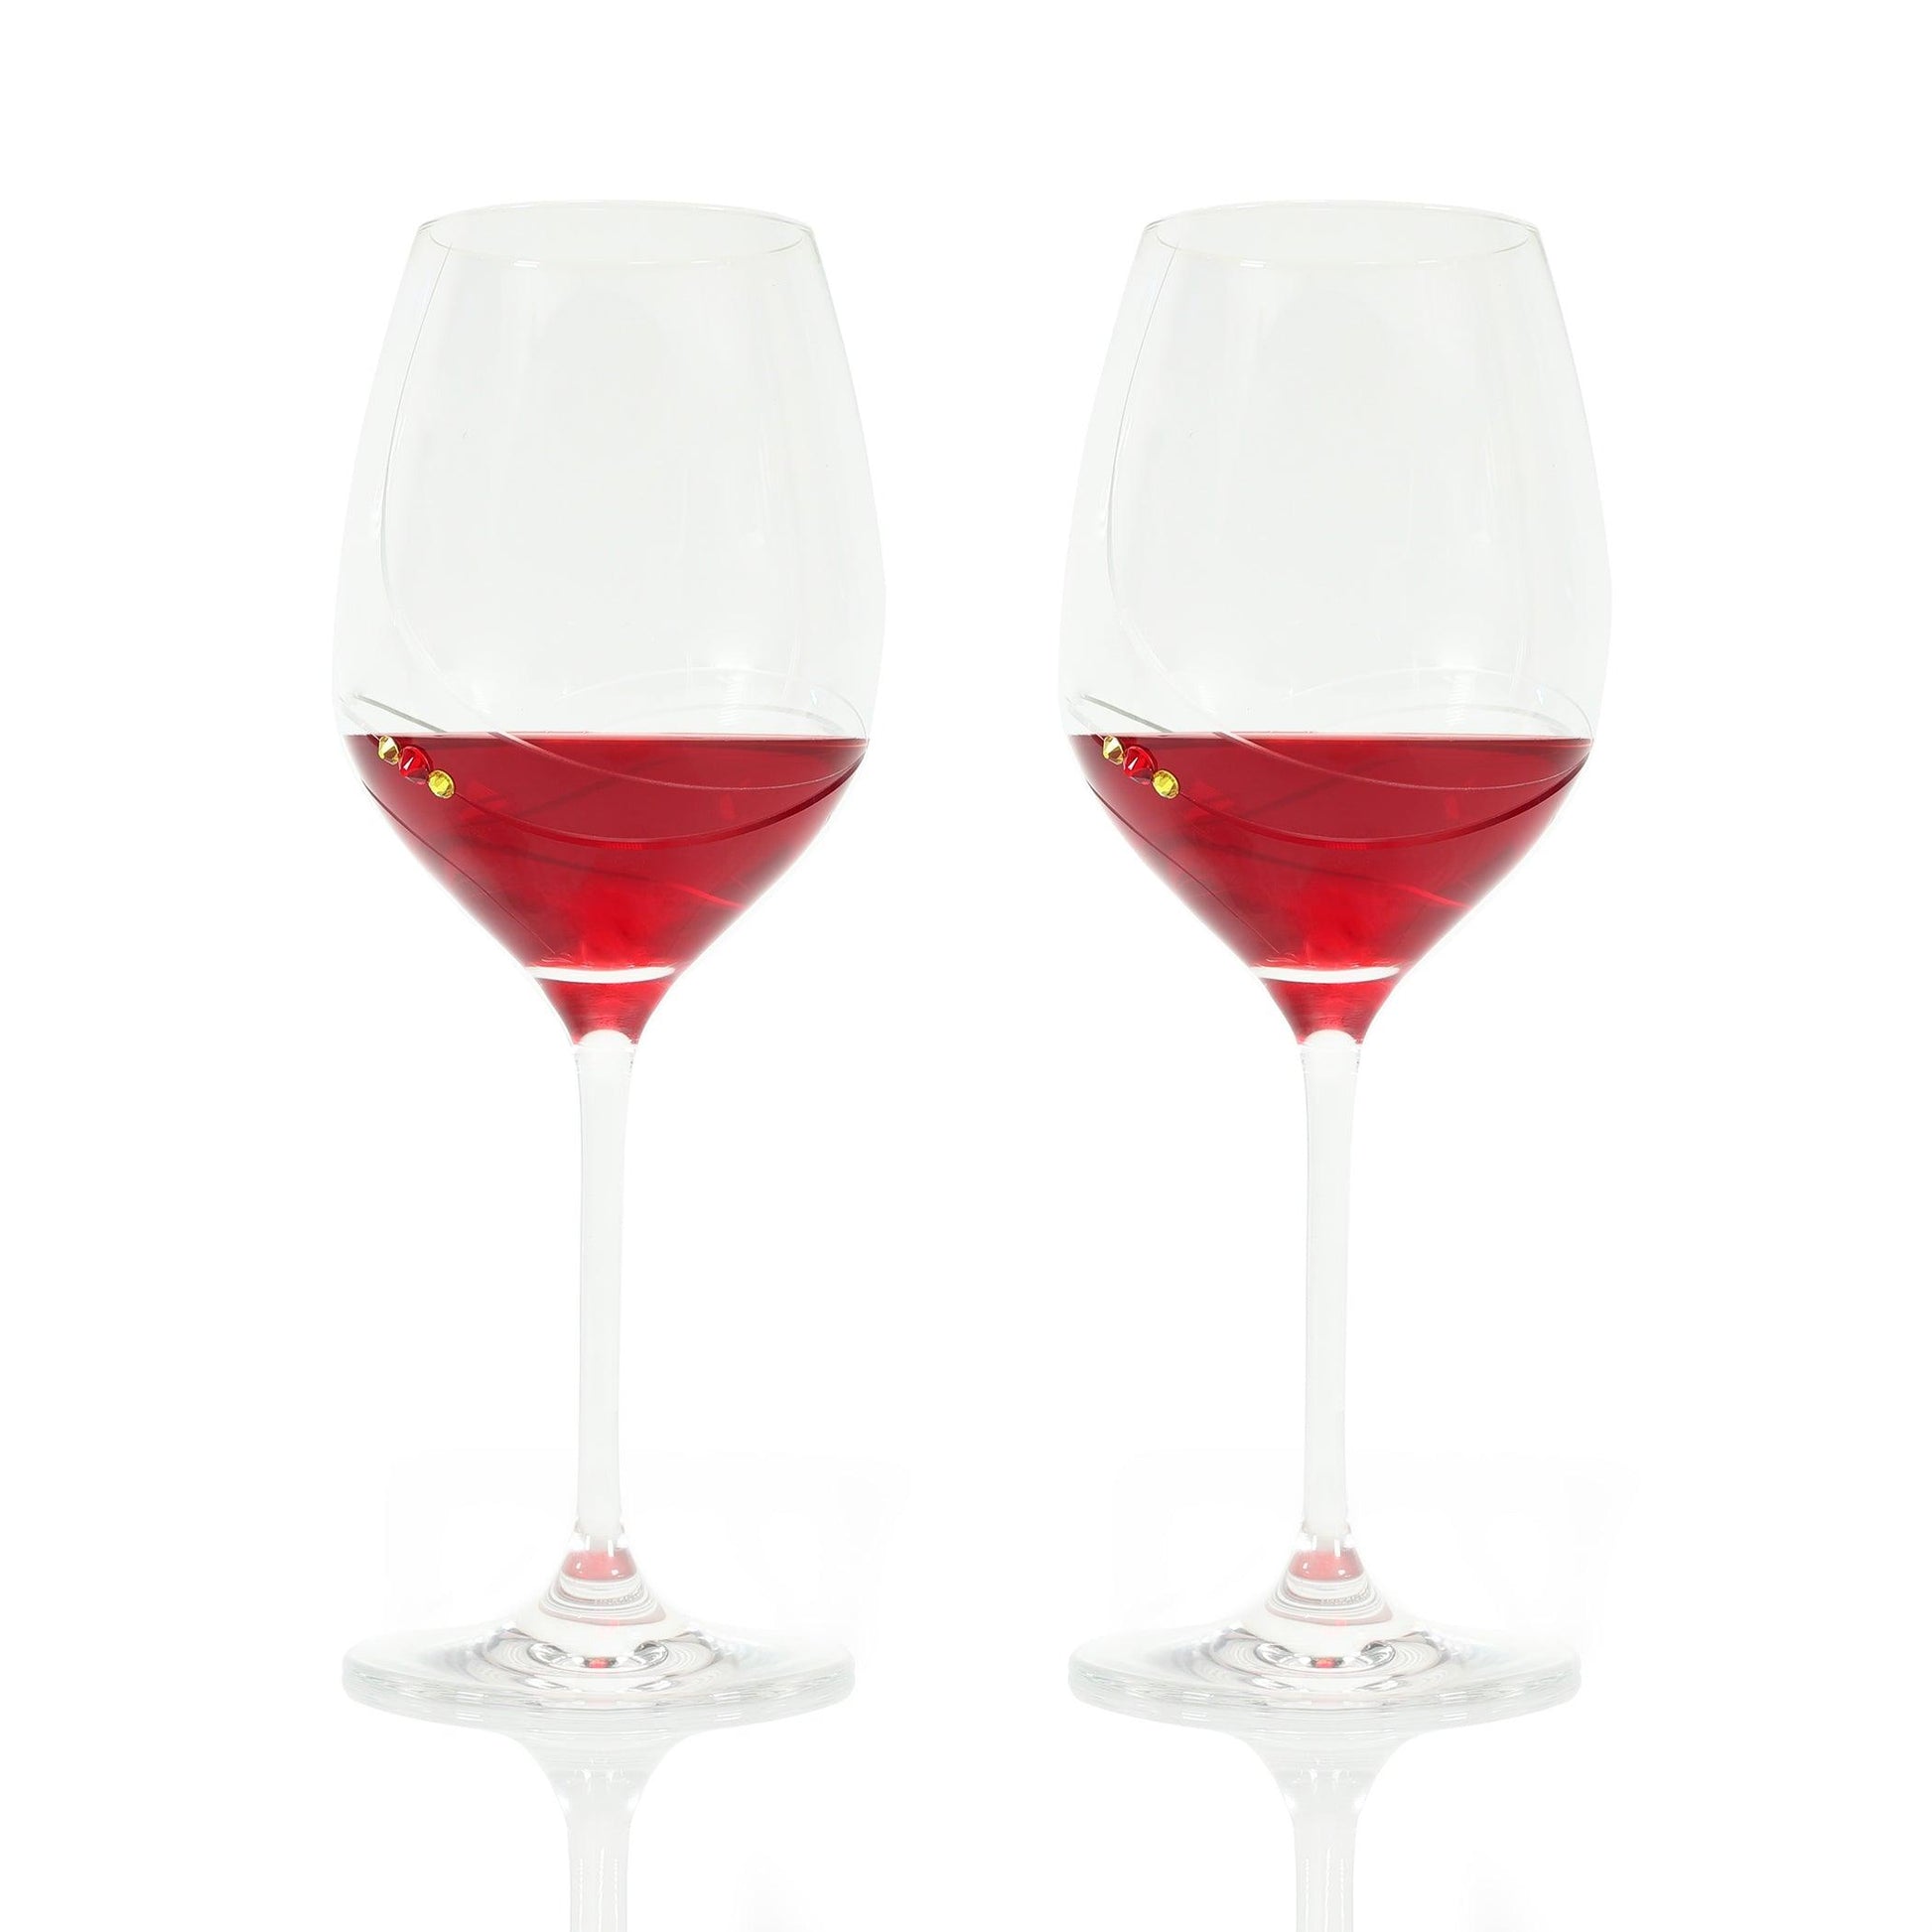 Wine Glass - Swarovski Crystals (7 photos) - Photography and Web Design - Los Angeles, US based Shopify Experts Revo Designs